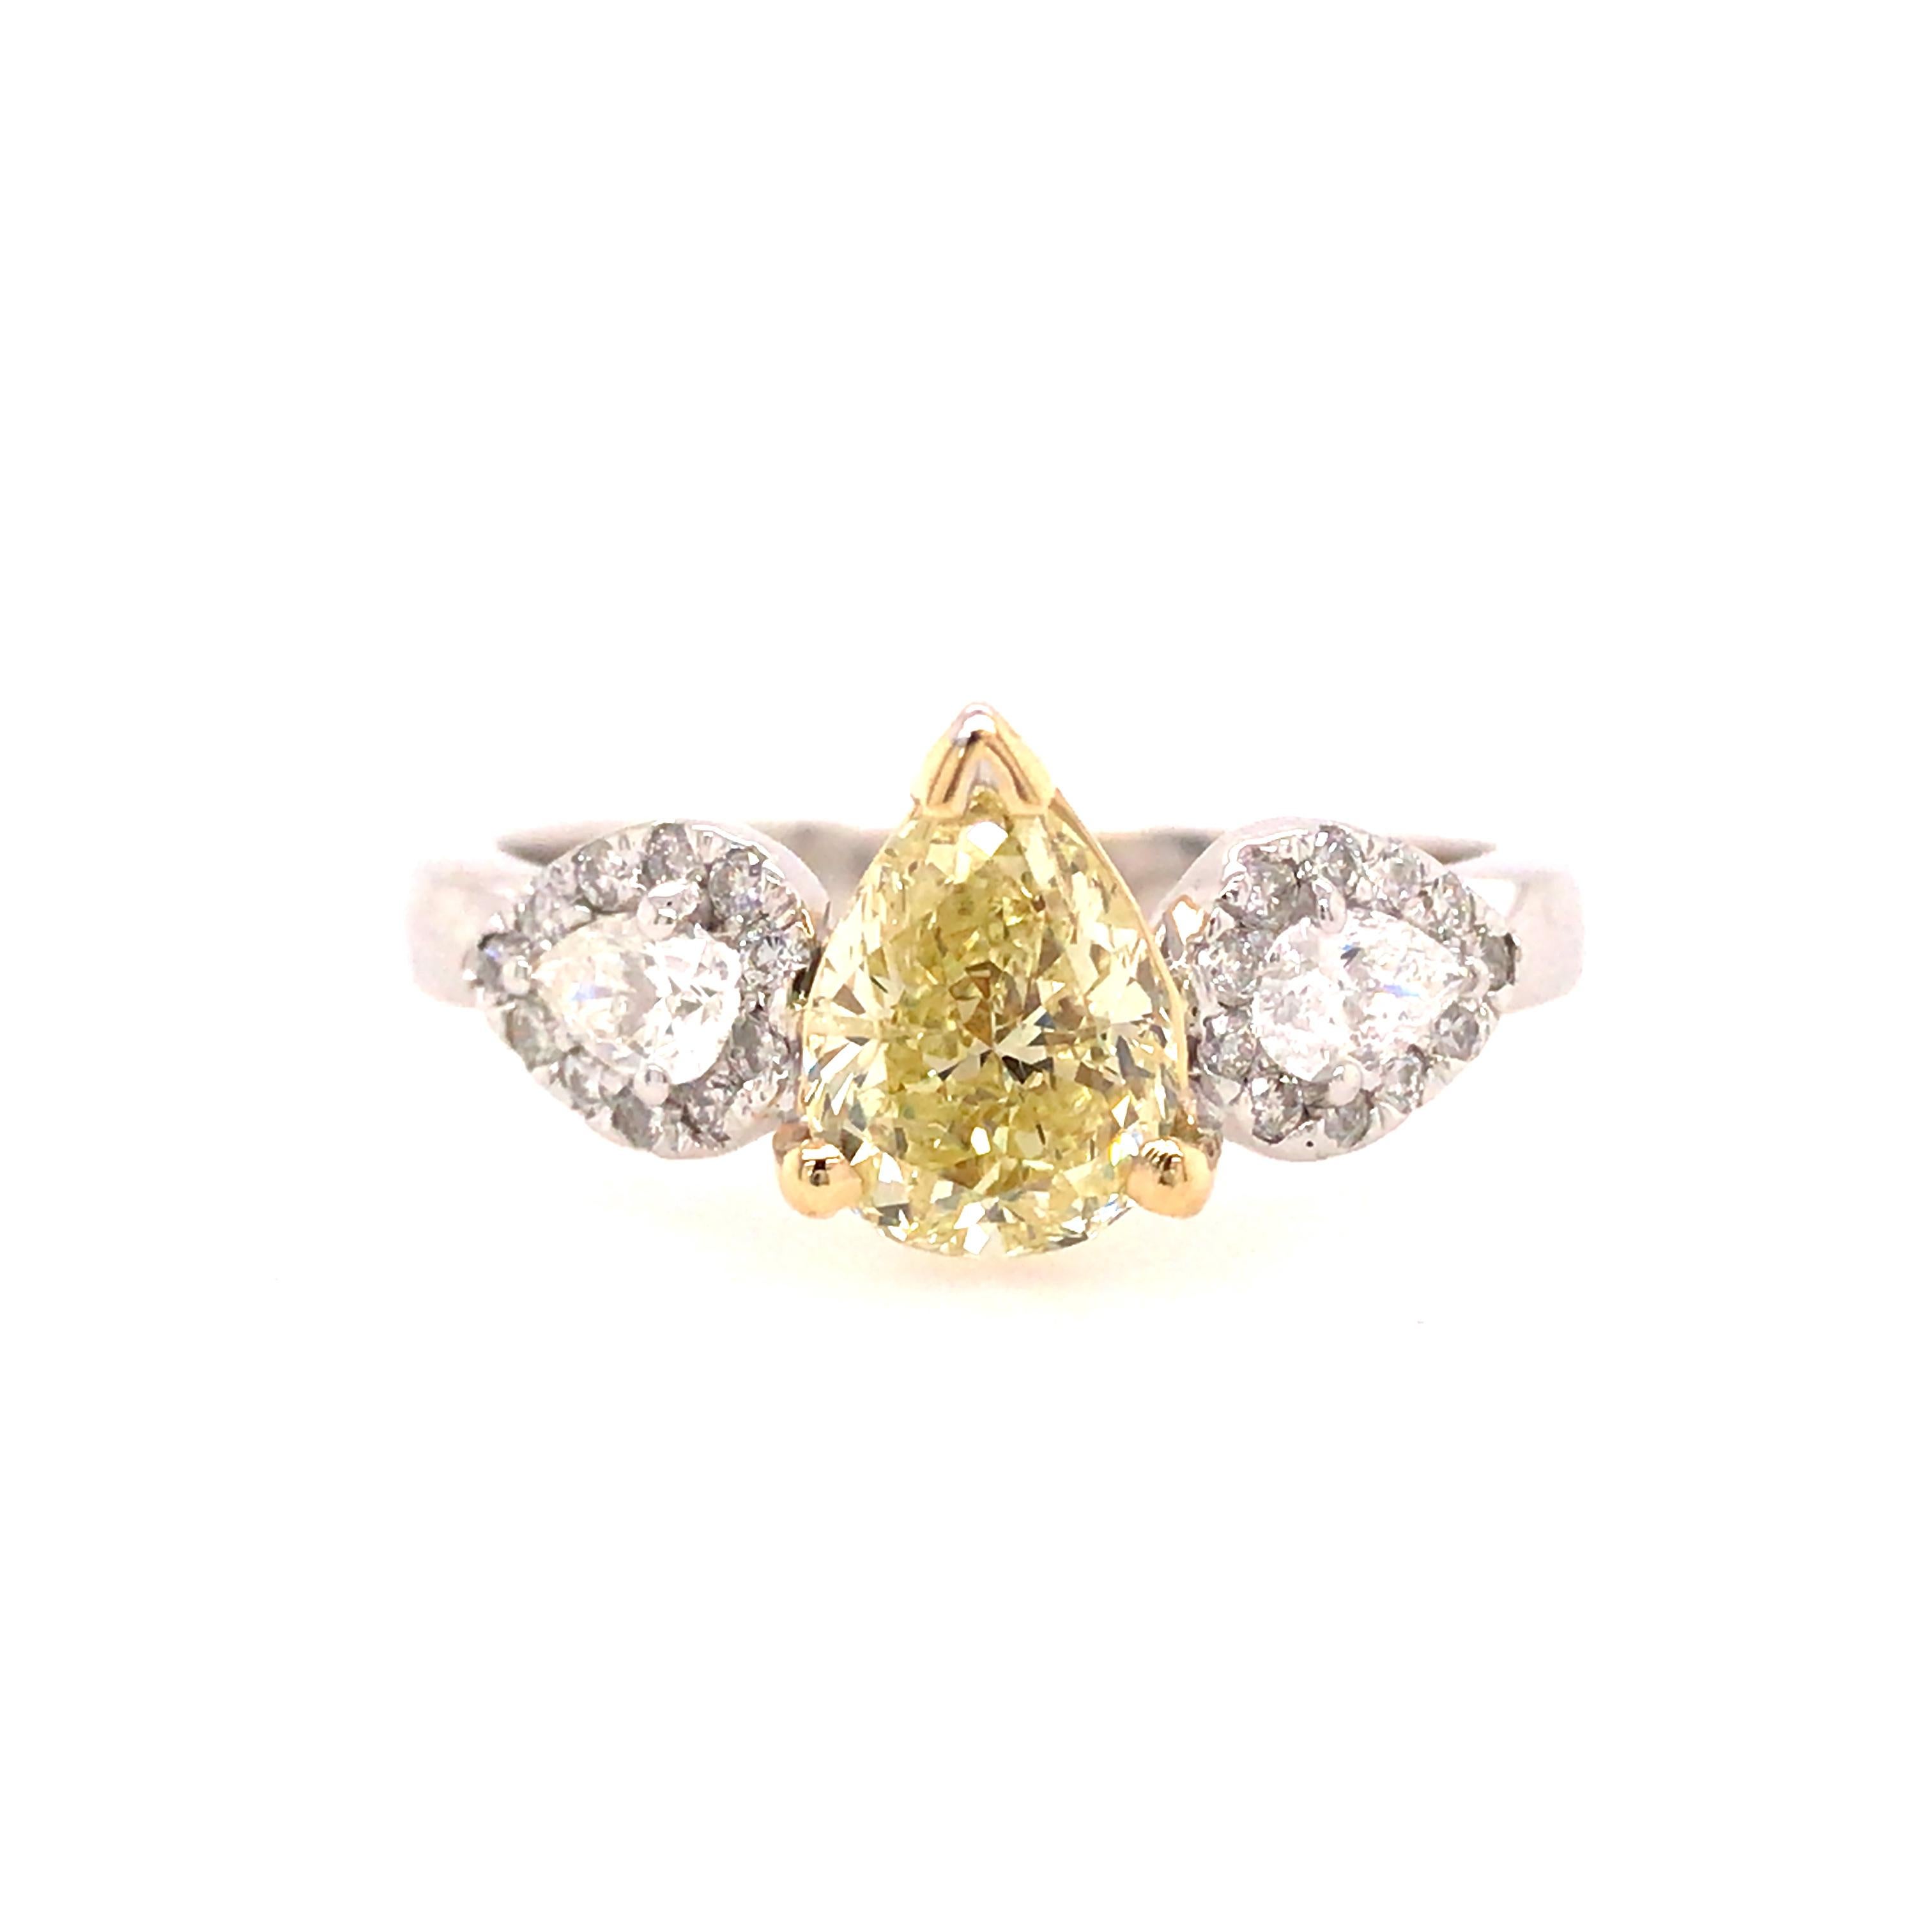 GIA Certified 1.39 Carat Fancy Yellow Pear Shape Diamond 3-Stone Ring in 18K Two-Tone Gold.  The Fancy Yellow Pear Shape Center, I1 in clarity is set between (2) Halo surrounded Pear Shape Diamonds weighing 0.65 carat total weight, G-H in color and